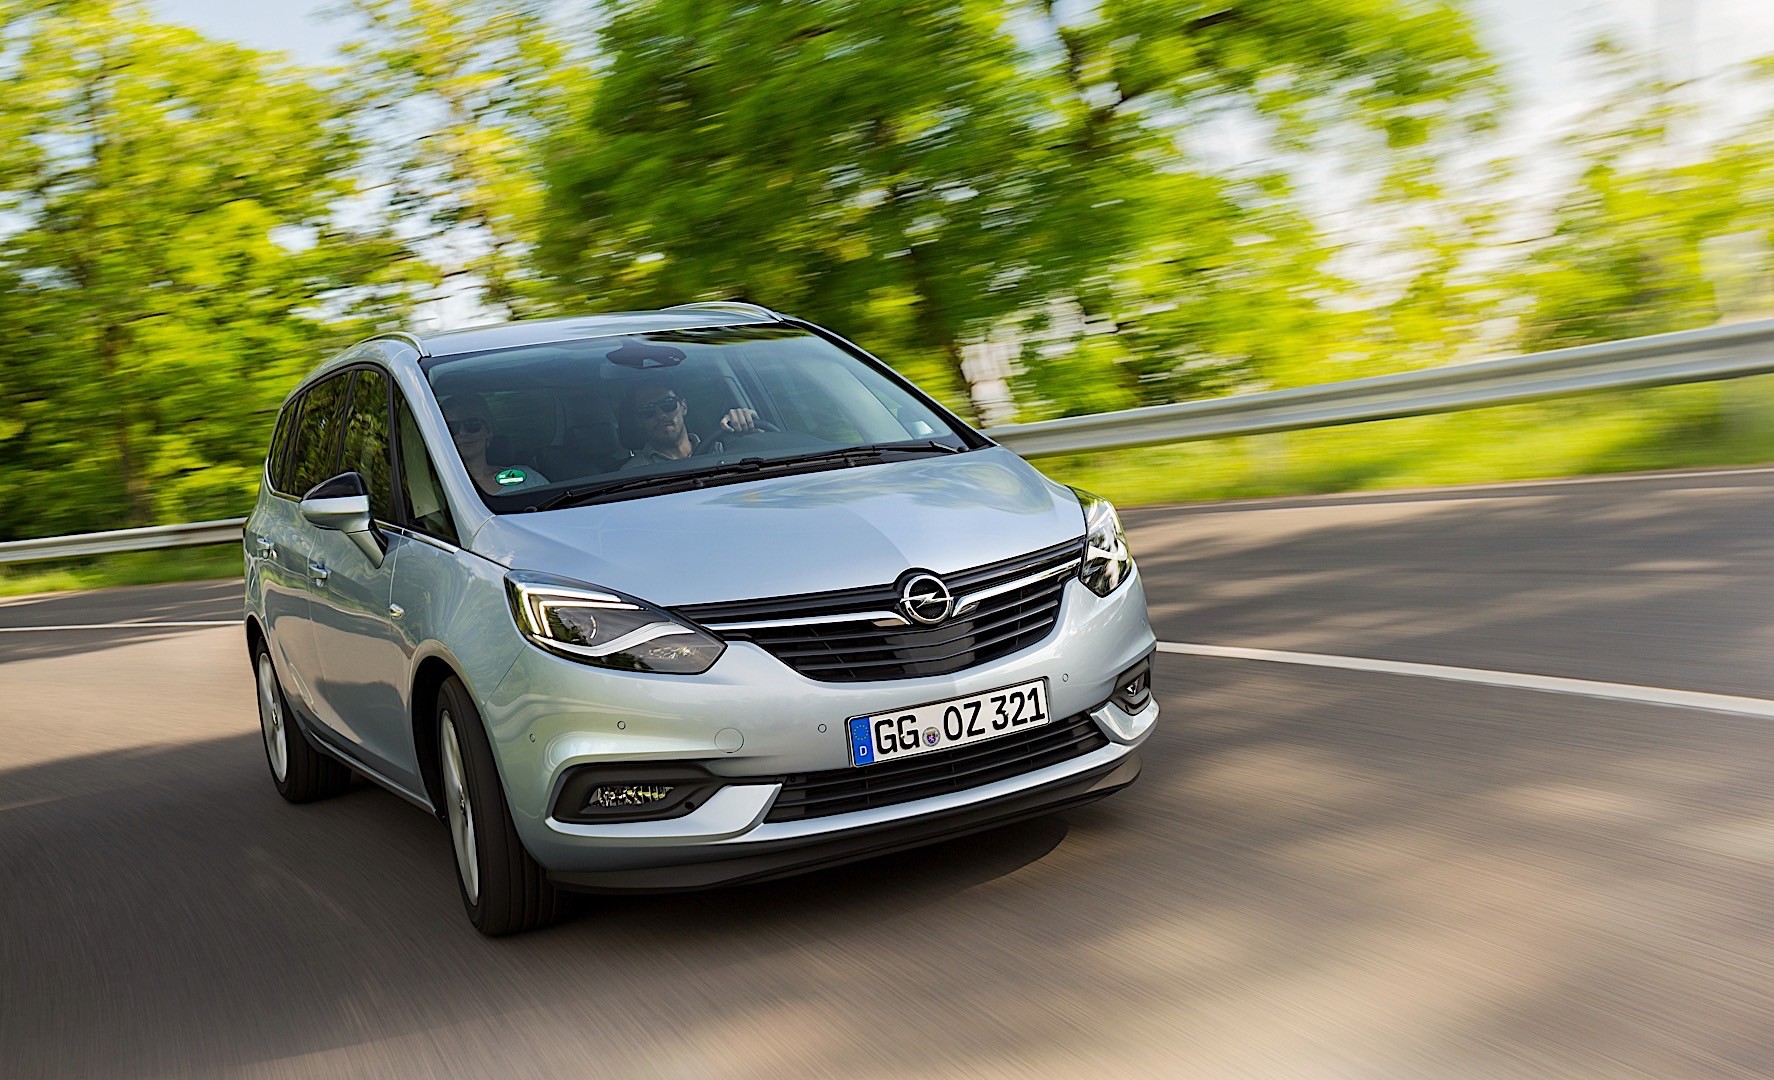 Opel introducing new CNG Zafira Tourer with 329-mile natural gas range,  lower fuel consumption - Green Car Congress